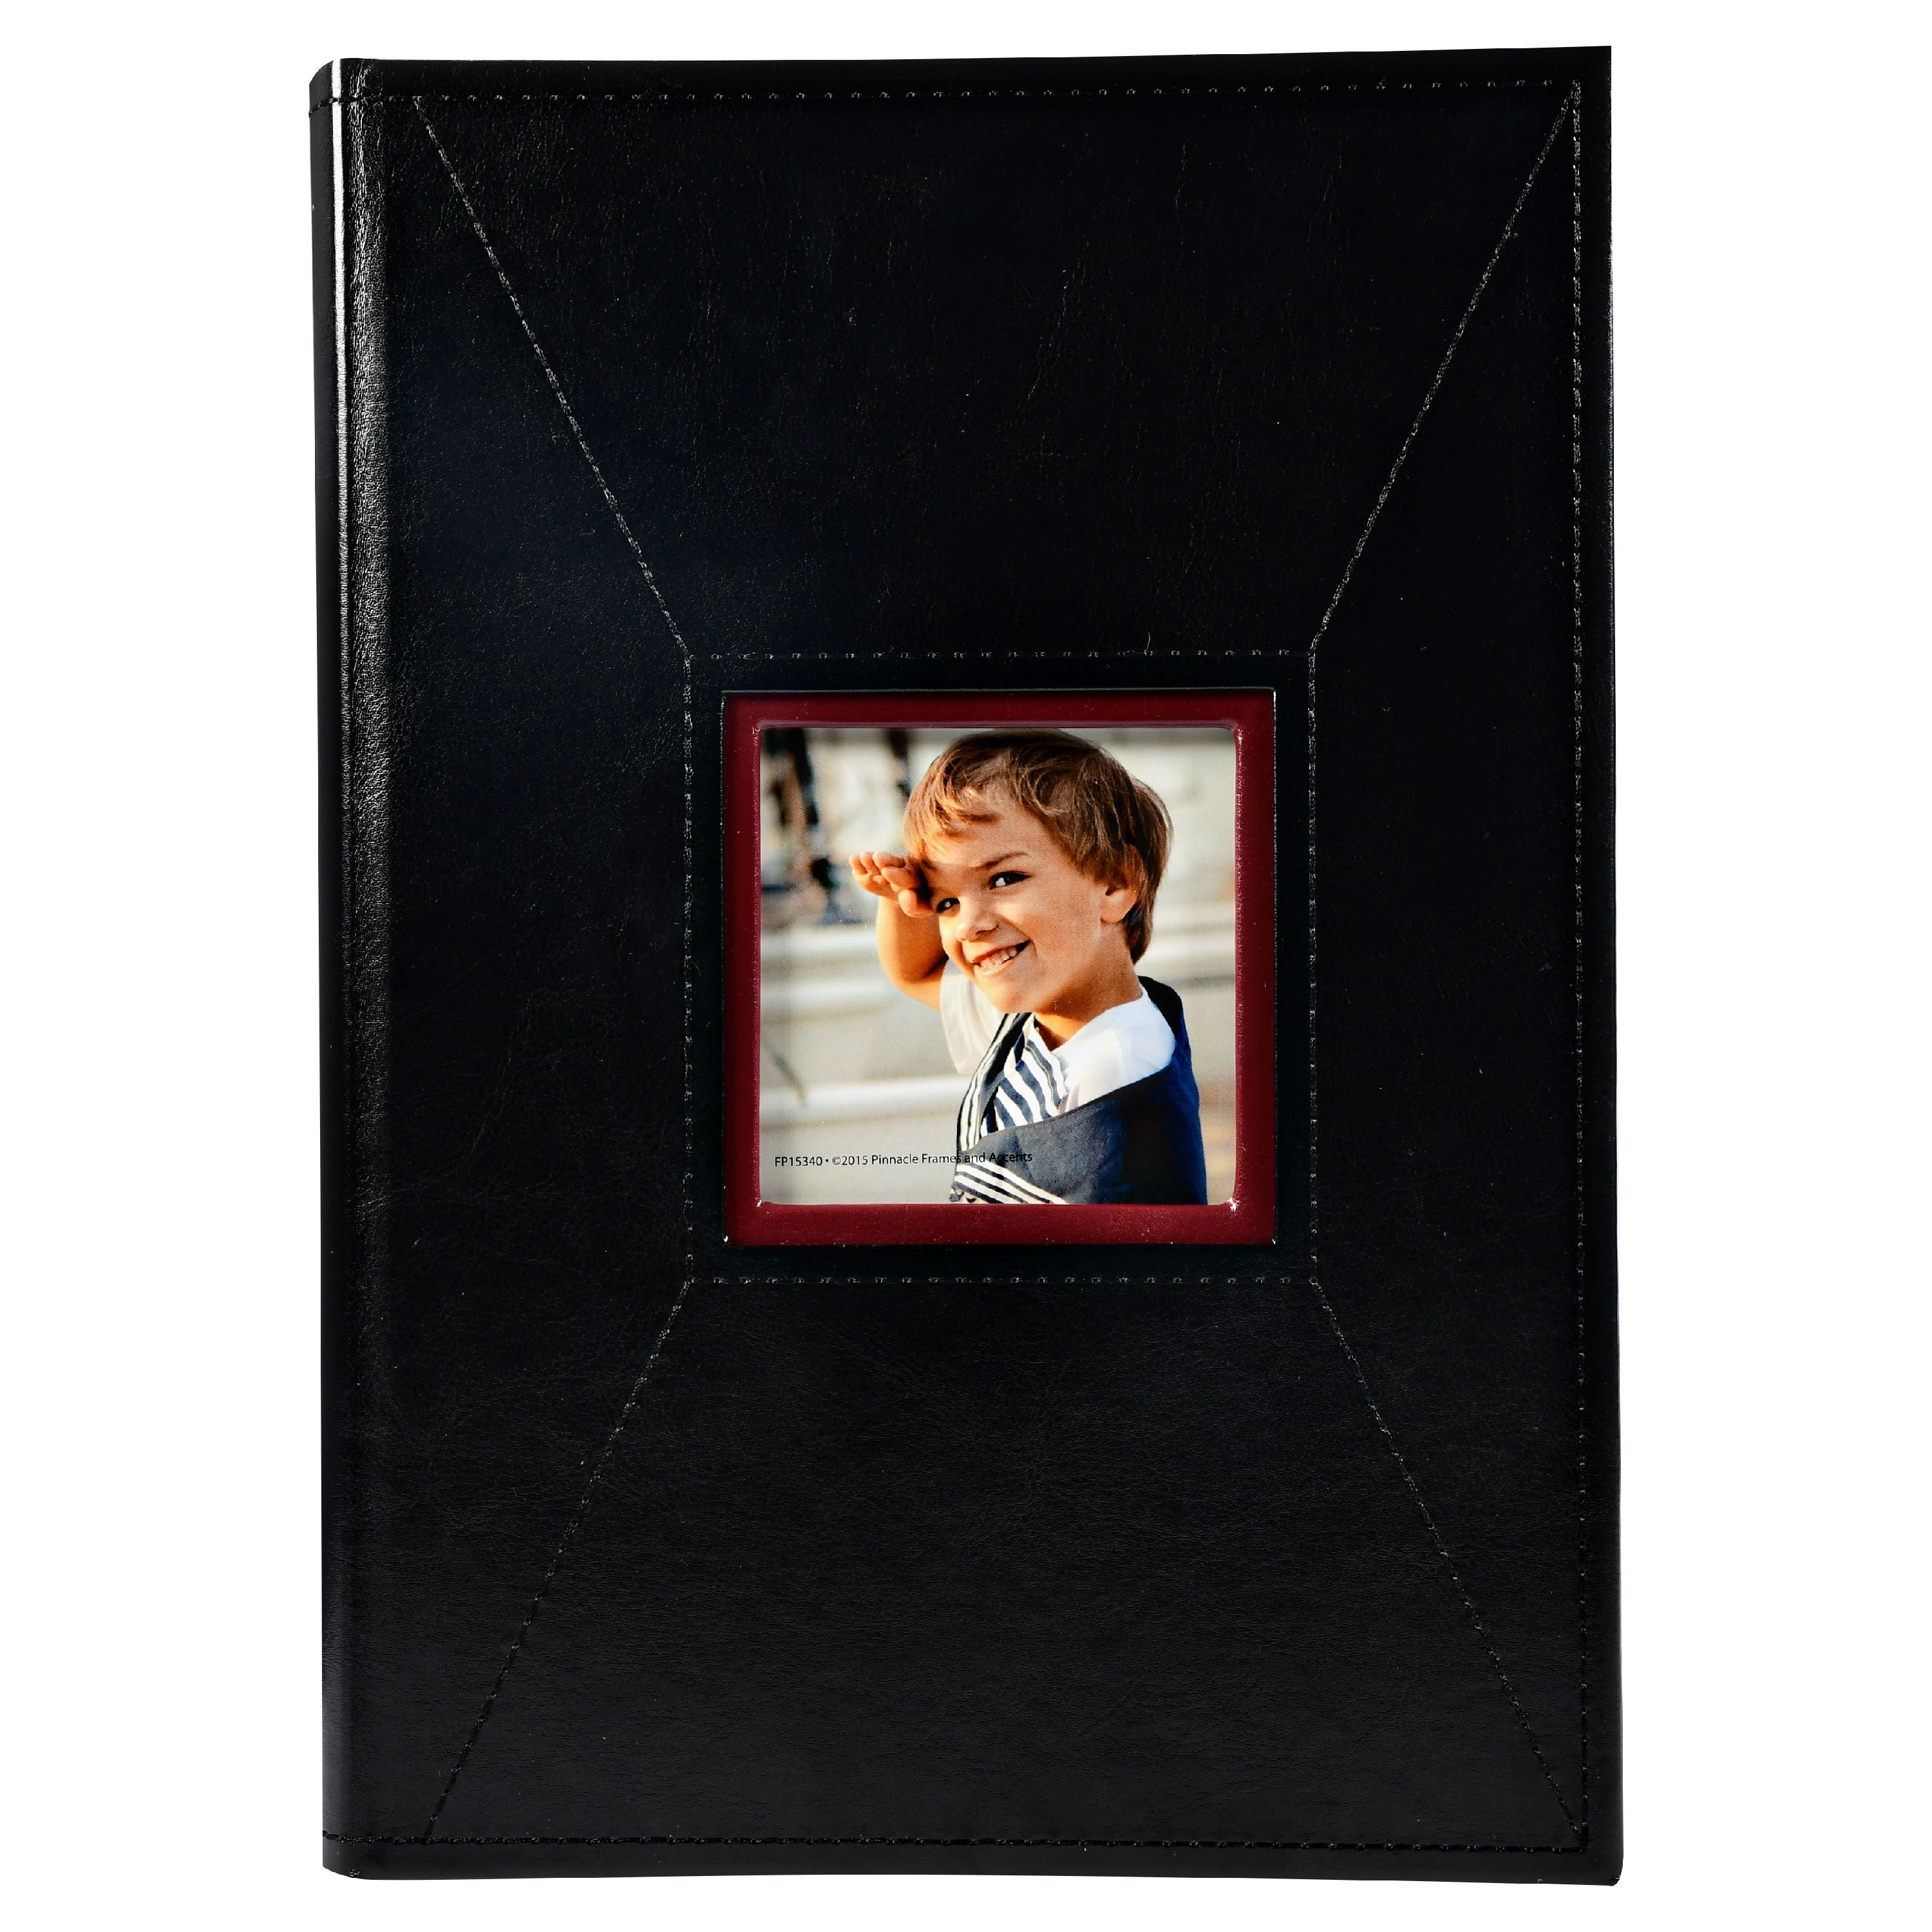 Holds 300 Pockets Black Leather Window Cover Design Bookshelf Photo Albums Acid-Free Black Inner Page Pictures Photo Book for Family Wedding Baby Friend Pet Photo Album for 4x6 Photos